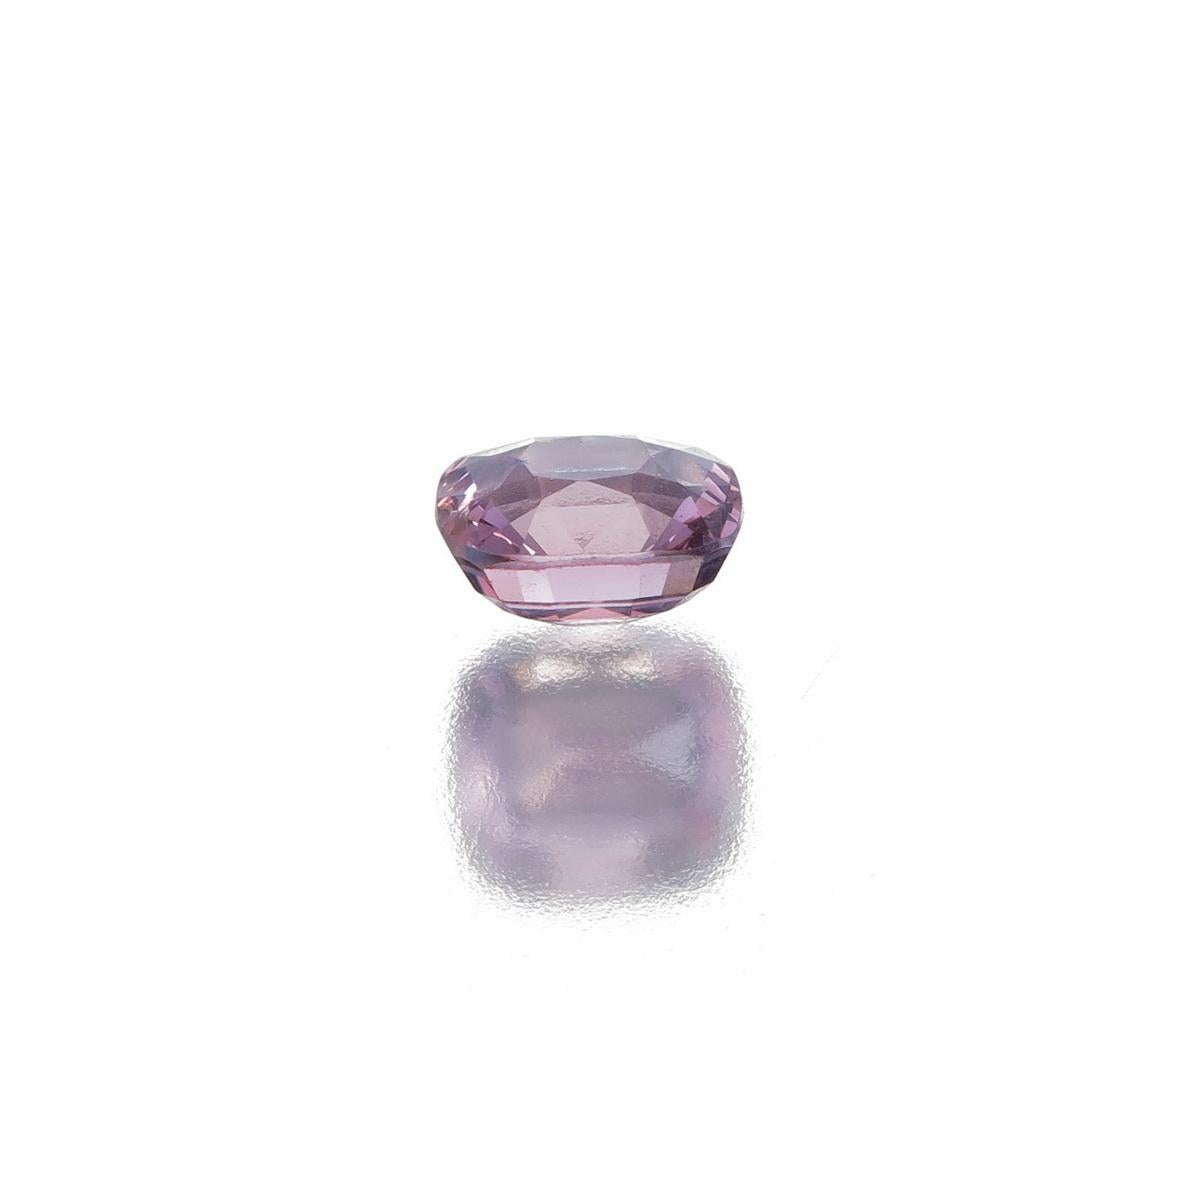 Cushion Cut 1.16 Carat Natural Pink Spinel from Burma No Heat For Sale